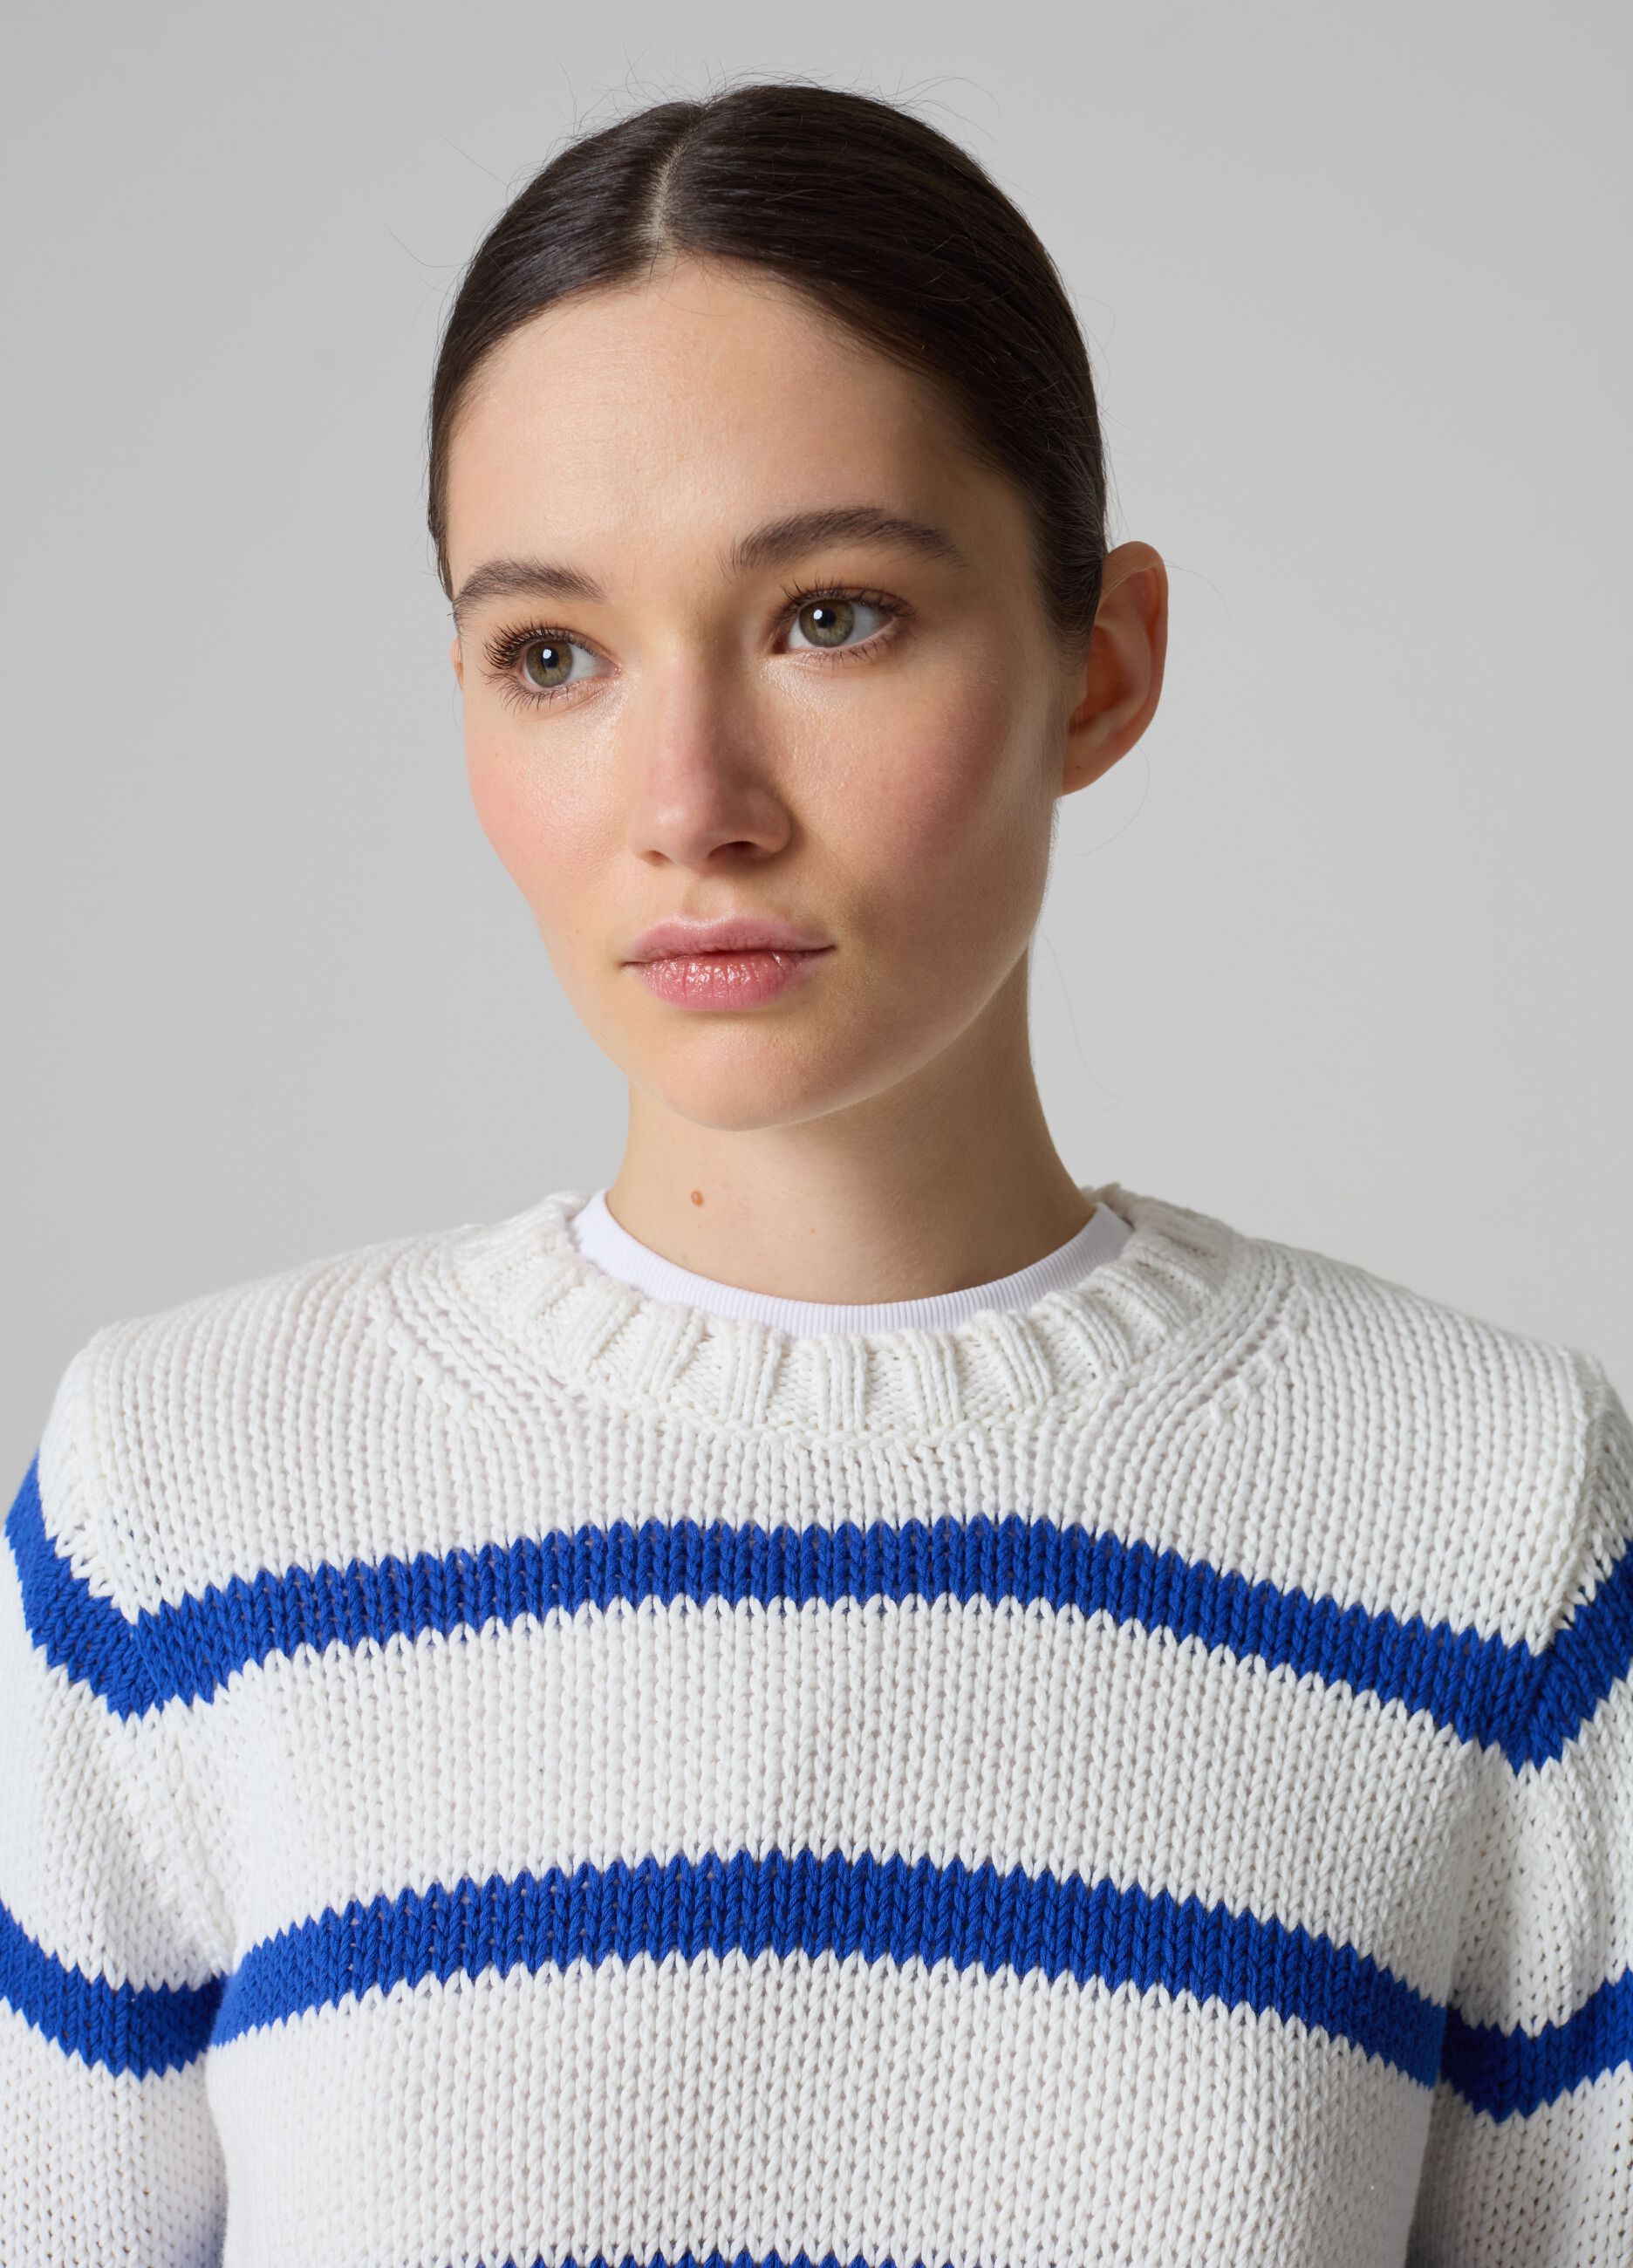 Pullover cropped in cotone a righe